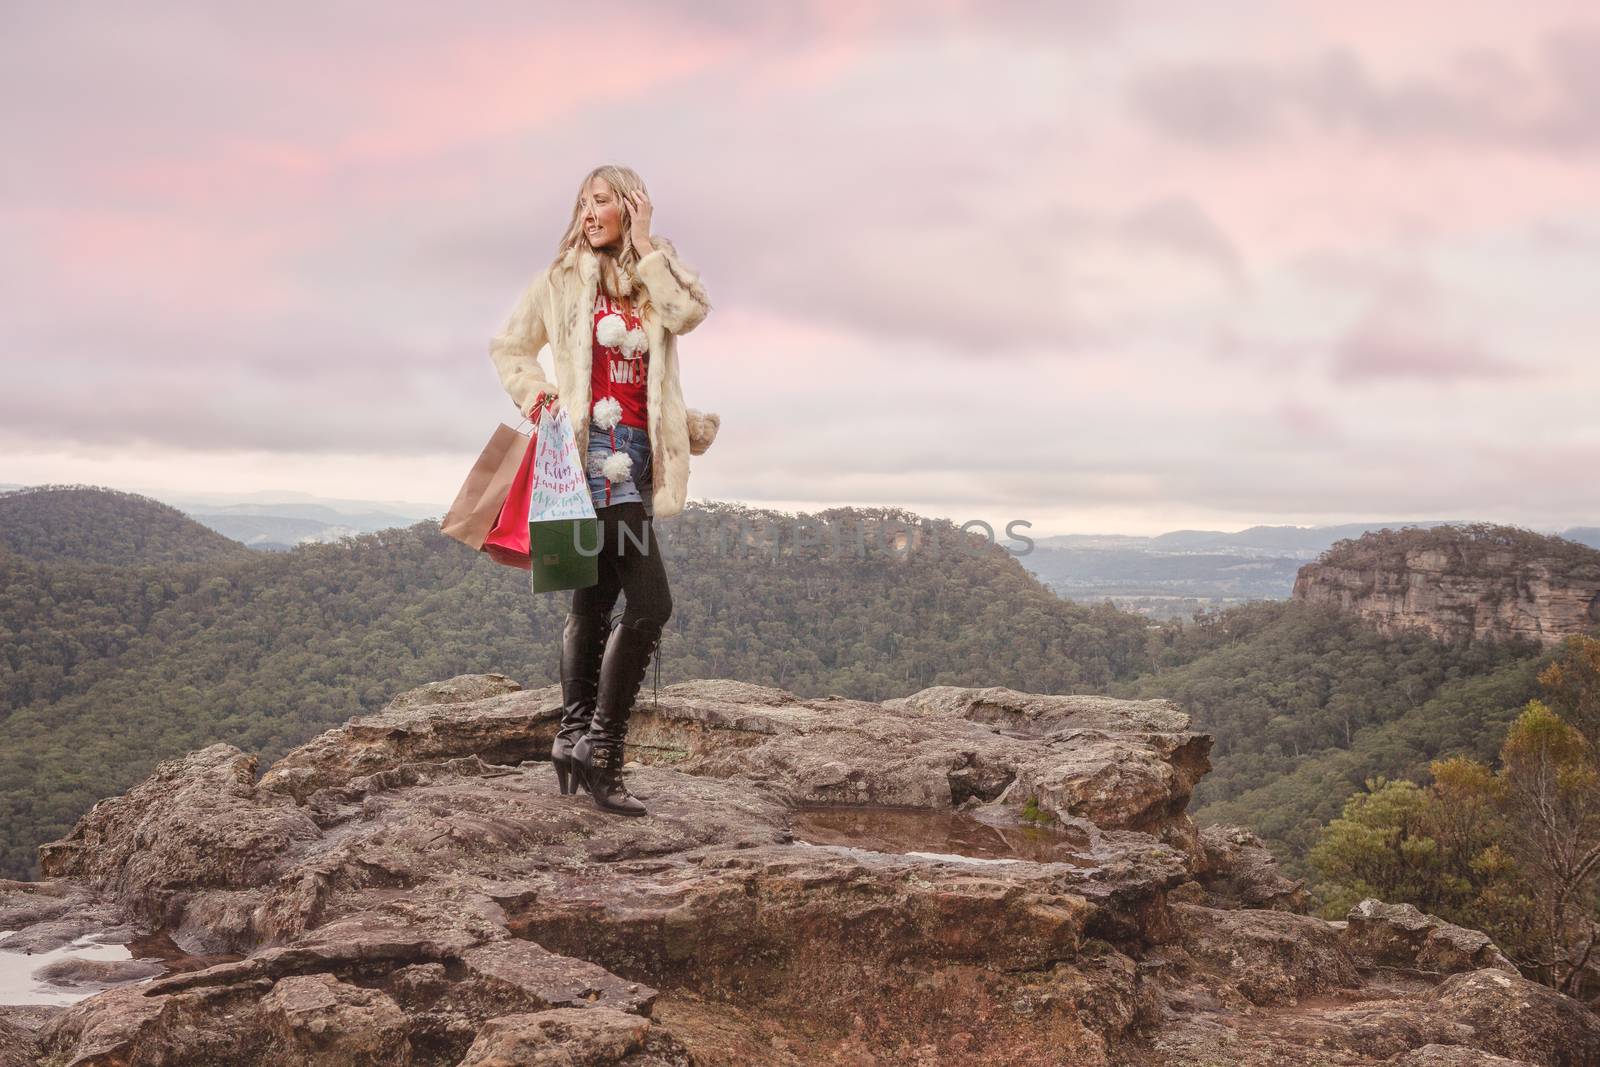 Christmas in July, Christmas in Blue Mountains, Eclectic  woman wearing coat and long boots carrying gift or retail shopping bags, Christmas theme with Blue Mountains backdrop